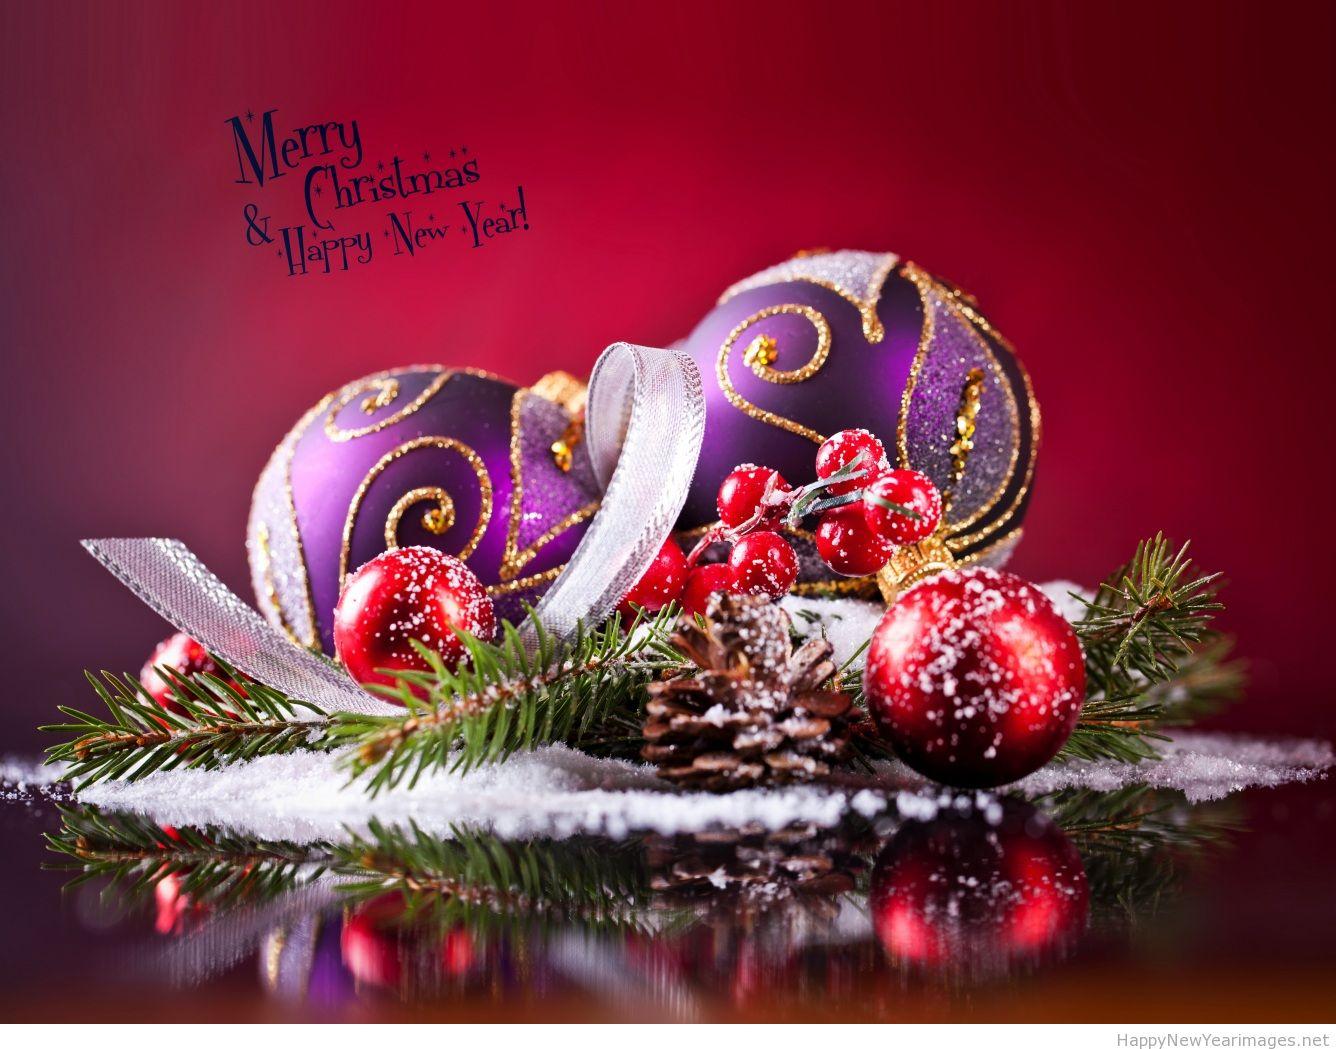 Happy new year & Merry Christmas 2014 2015 wallpaper